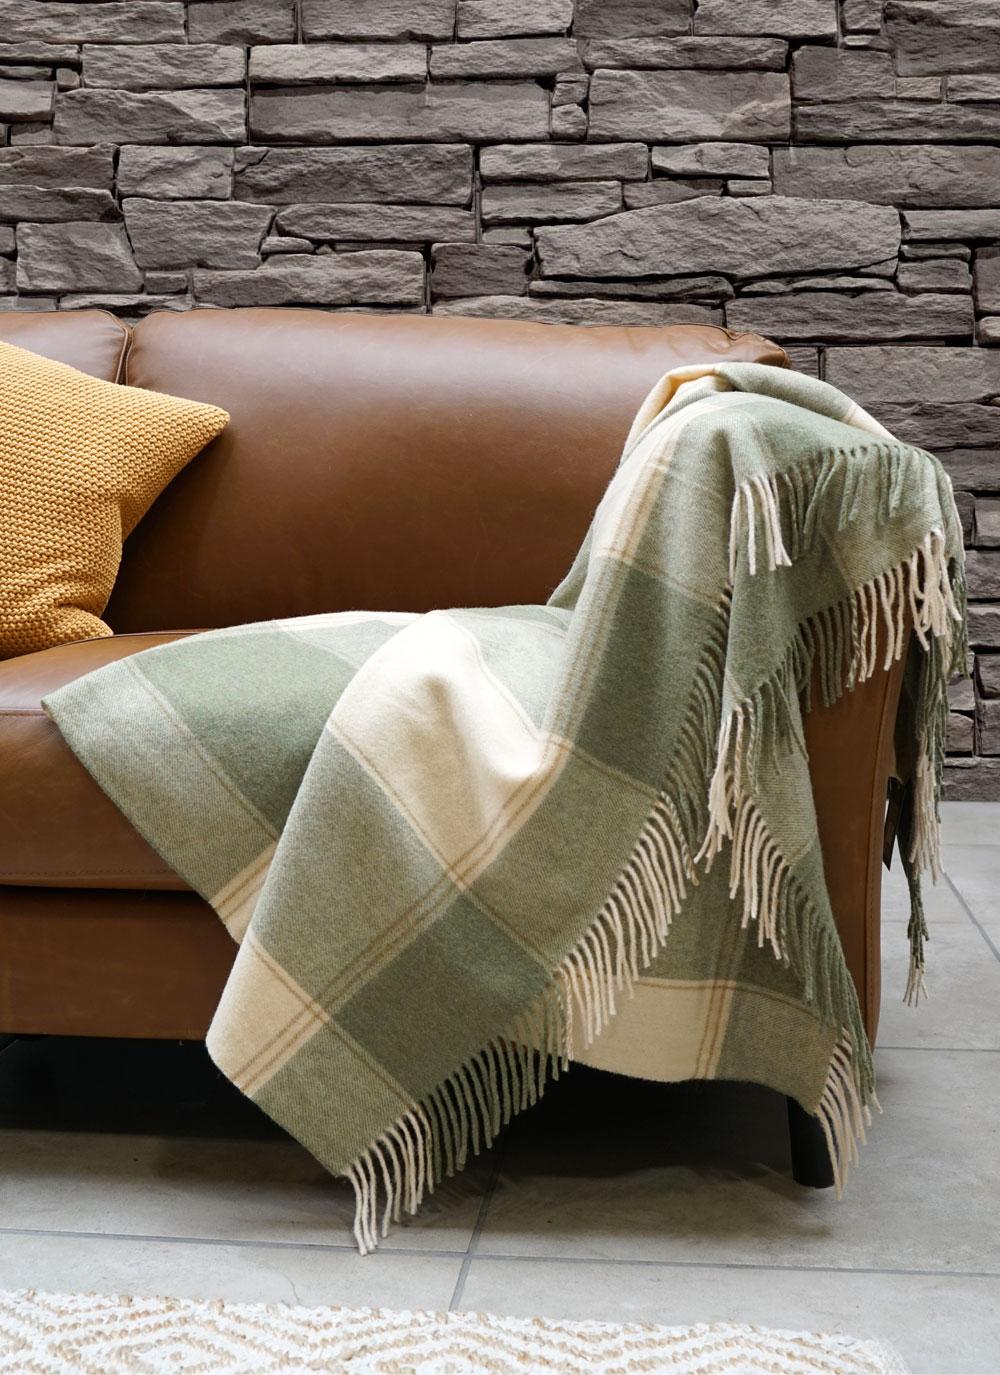 Cozy up with the Blarney Green & Cream Lambswool Throw